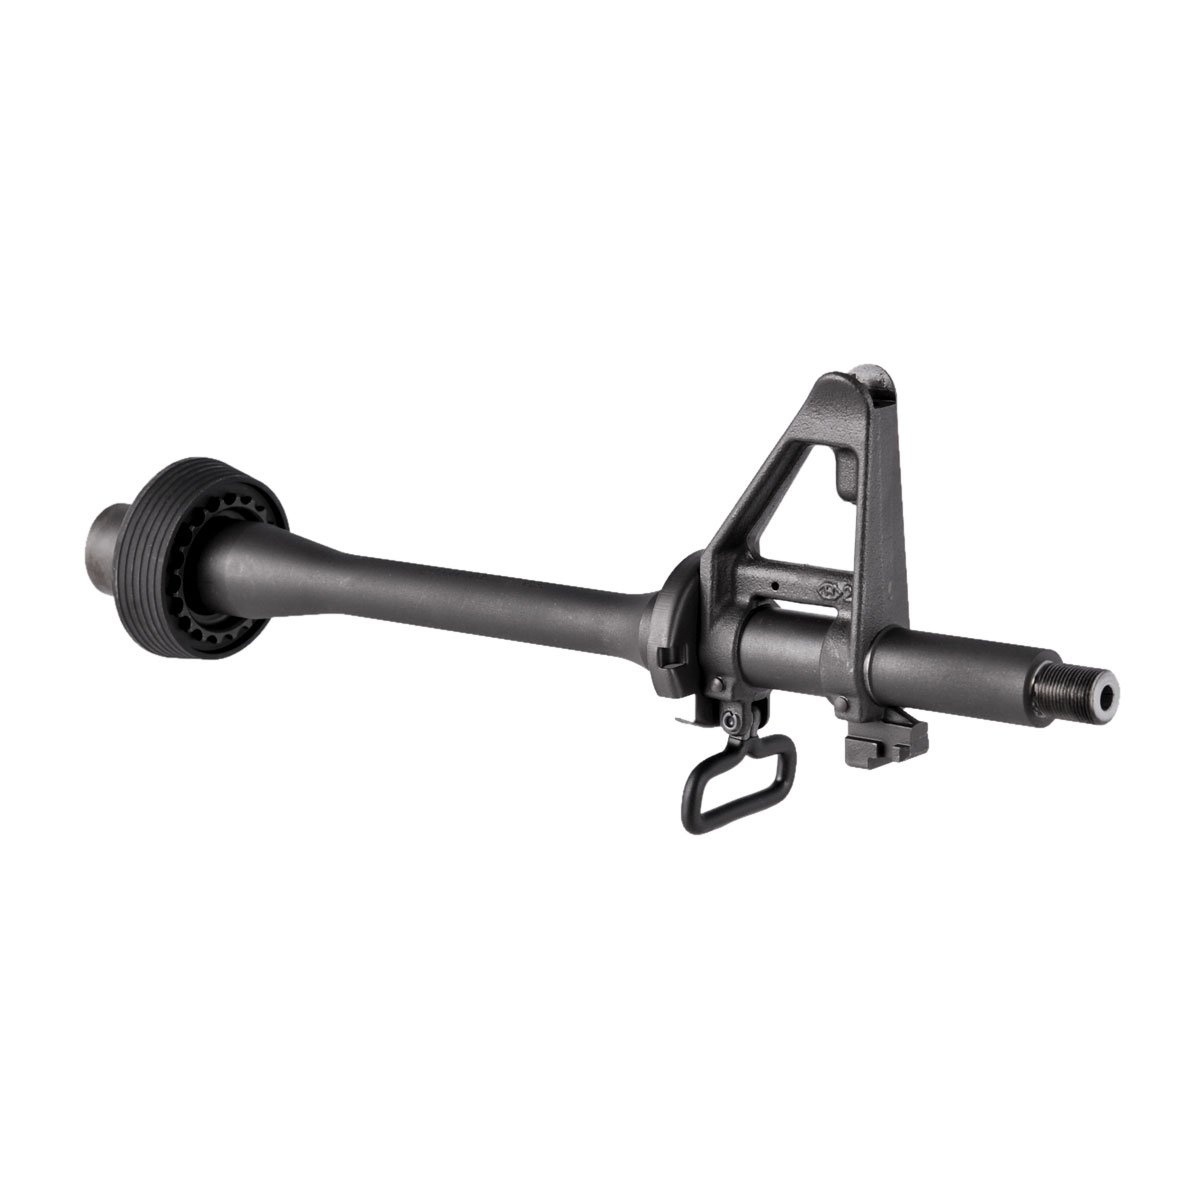 BROWNELLS - AR-15 CHROME LINED GOVERNMENT BARREL ASSEMBLIES